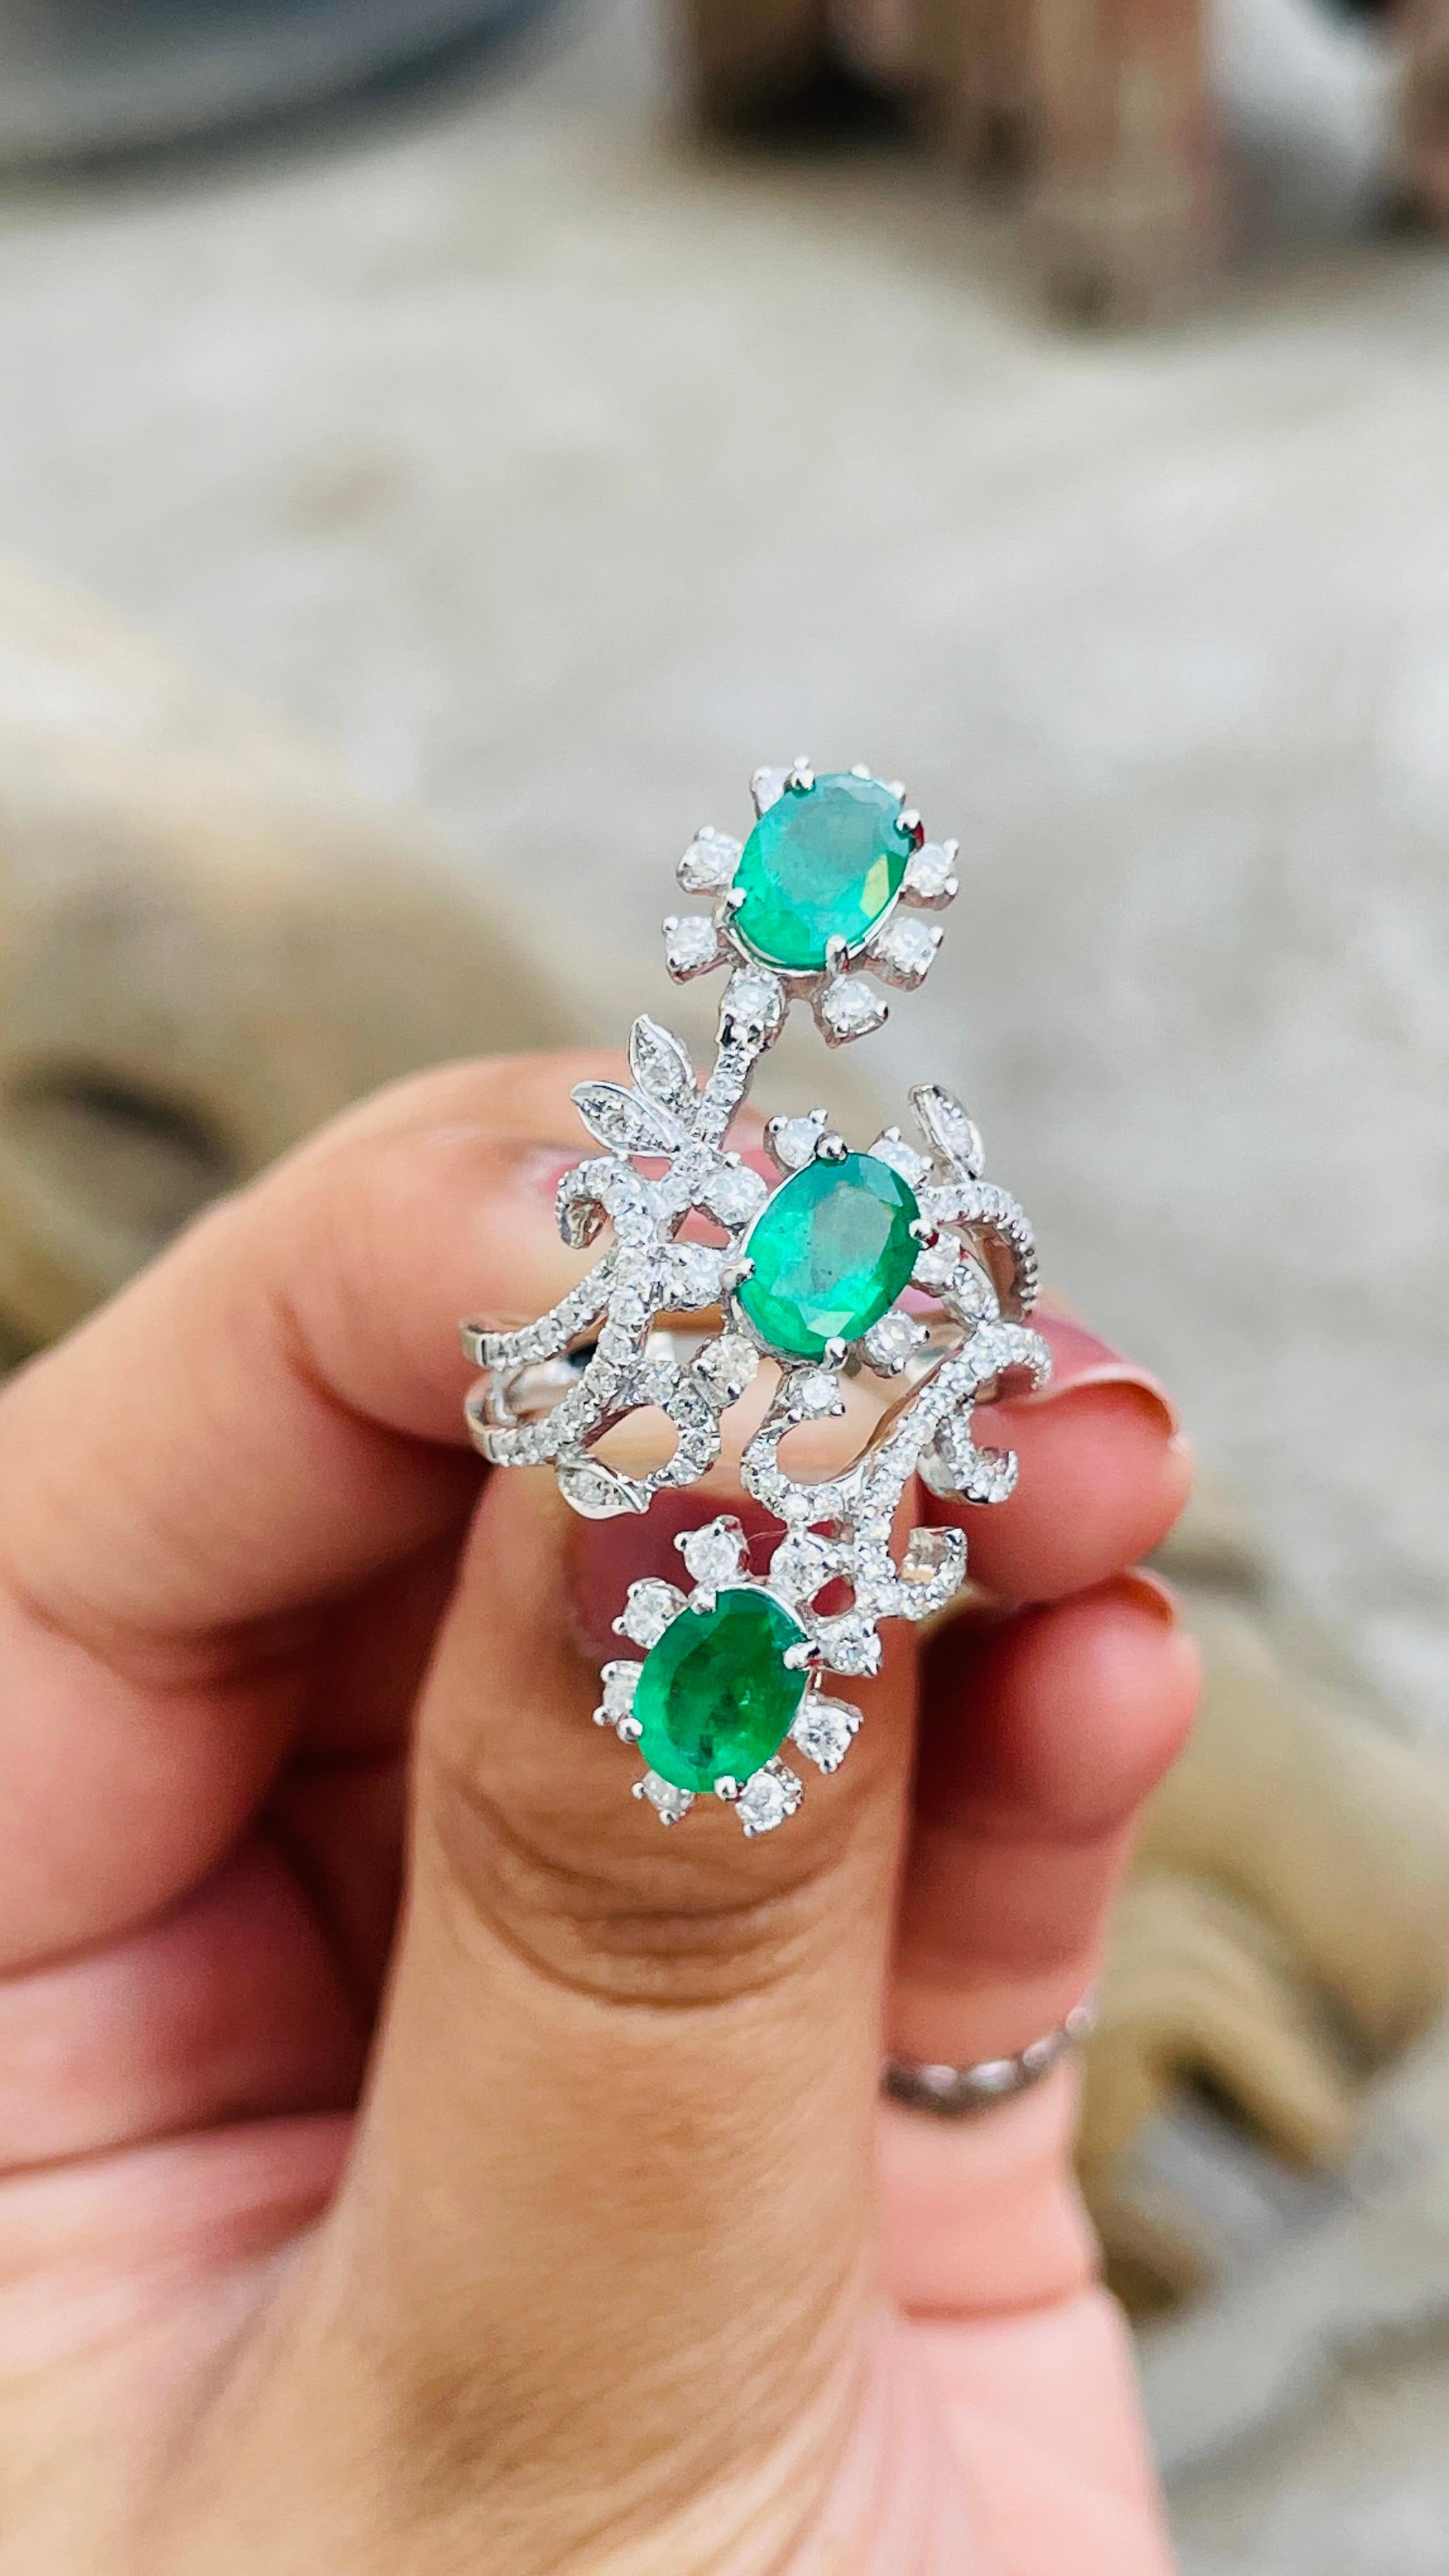 For Sale:  14K White Gold Three Stone Emerald and Diamond Cocktail Ring 6